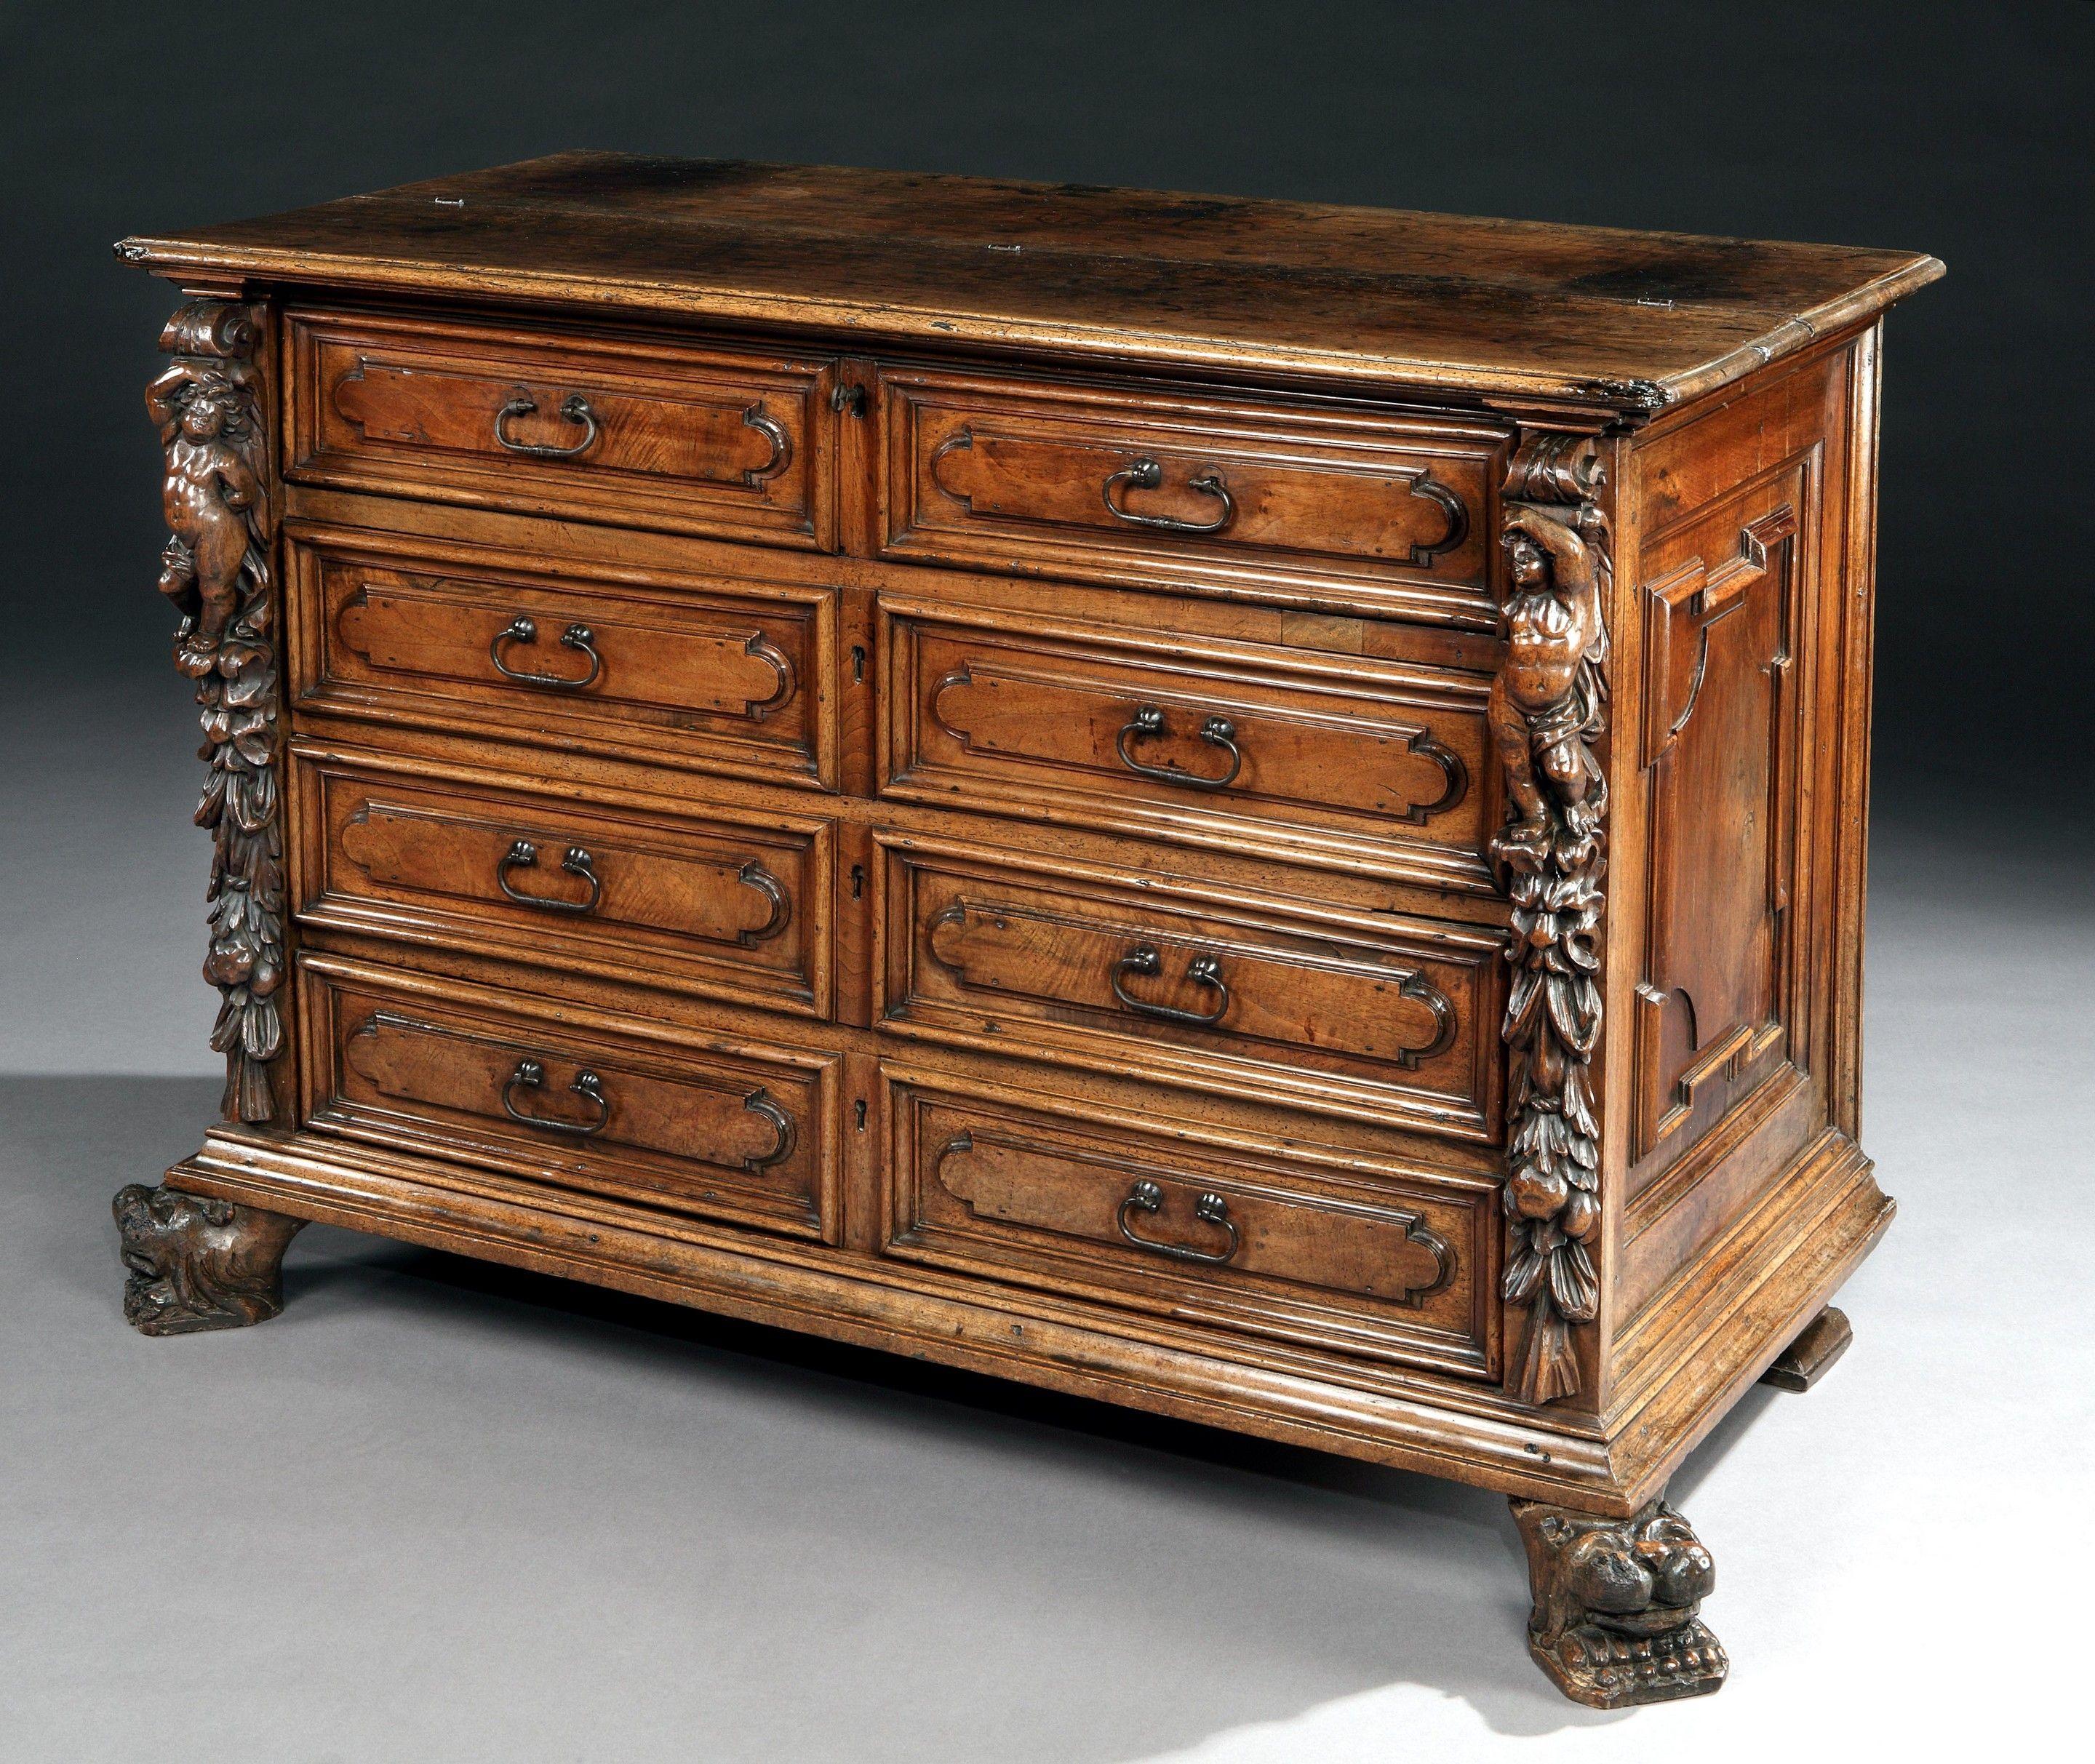 AN EXCEPTIONAL MUSEUM QUALITY, ITALIAN, RENAISANCE WALNUT CASSETTONE WITH A FITTED BUREAU IN THE UPPER PART & EXCEPTIONAL BAMBOCCI CARVING, LOMBARDY 

- This exceptionally rare, museum quality, piece of early furniture was conceived and crafted as